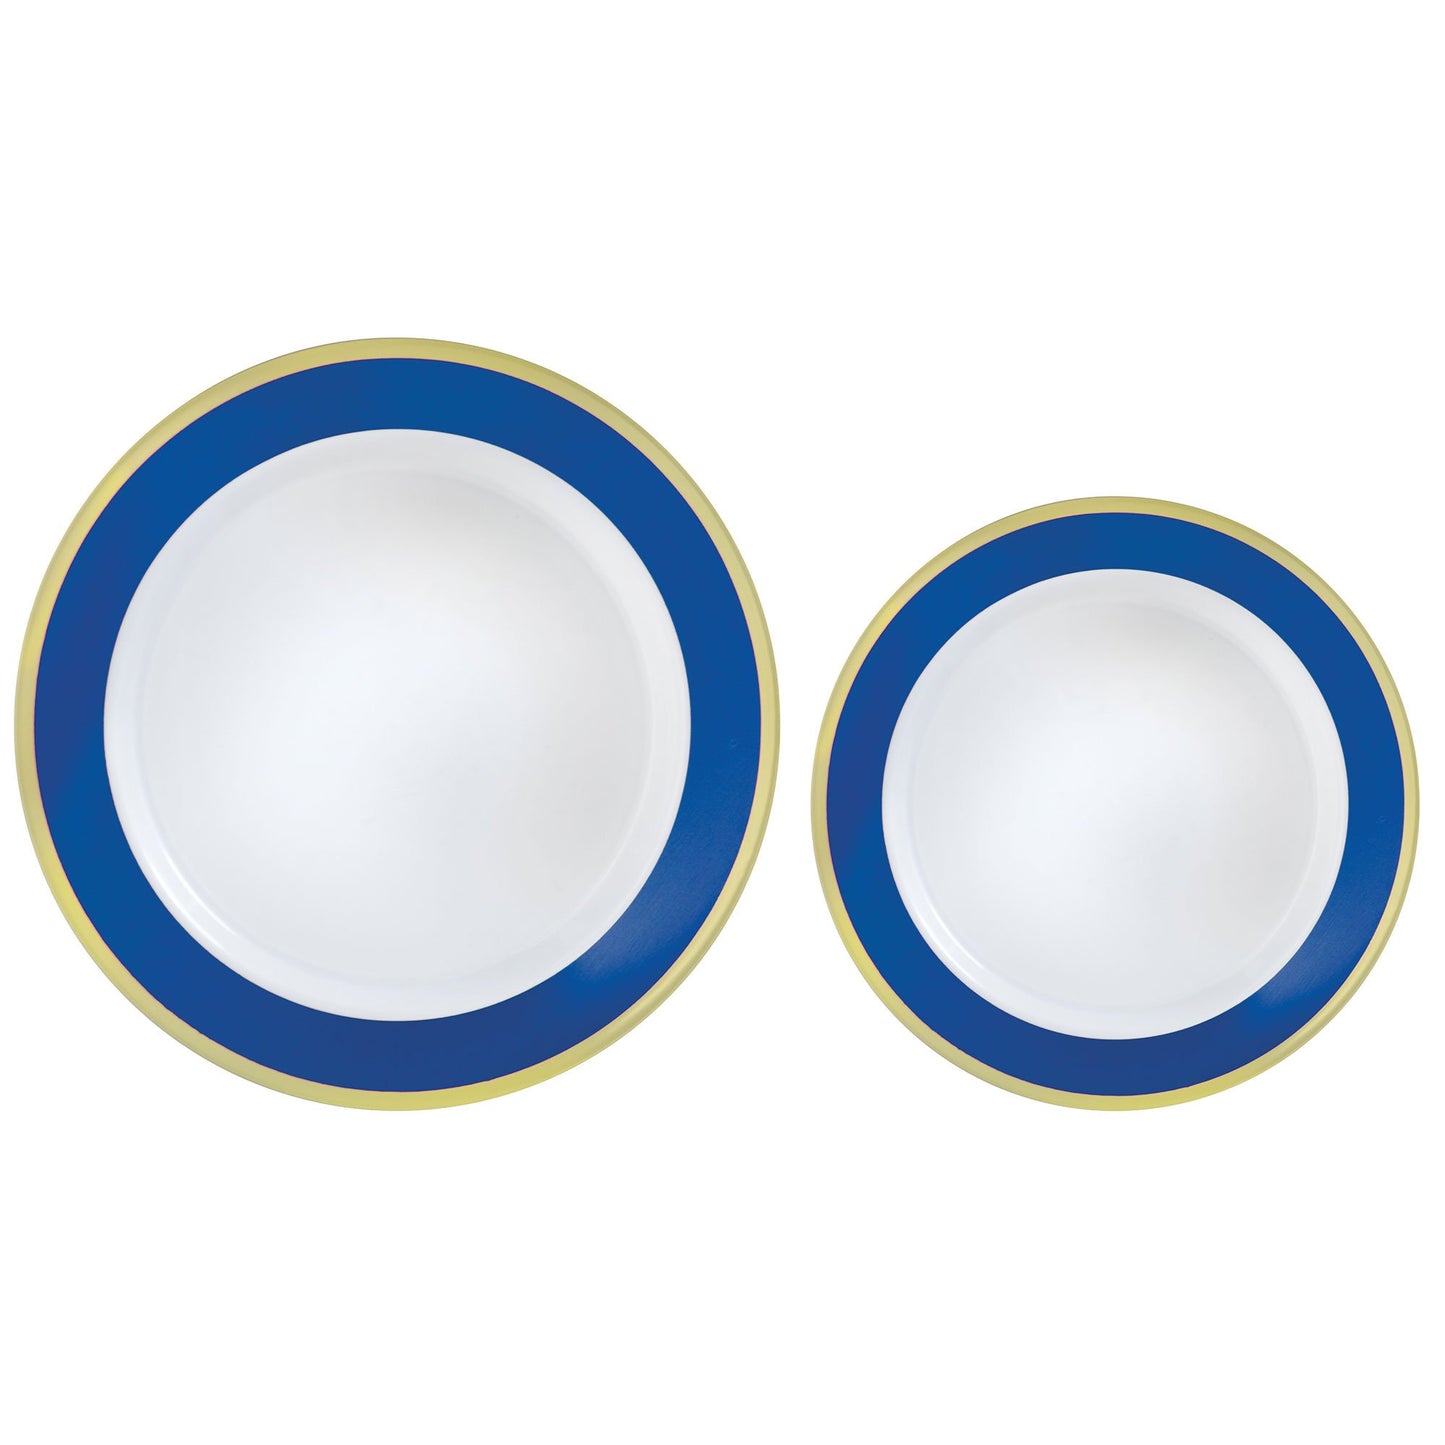 Premium Plastic Plates Hot Stamped with Bright Royal Blue Border